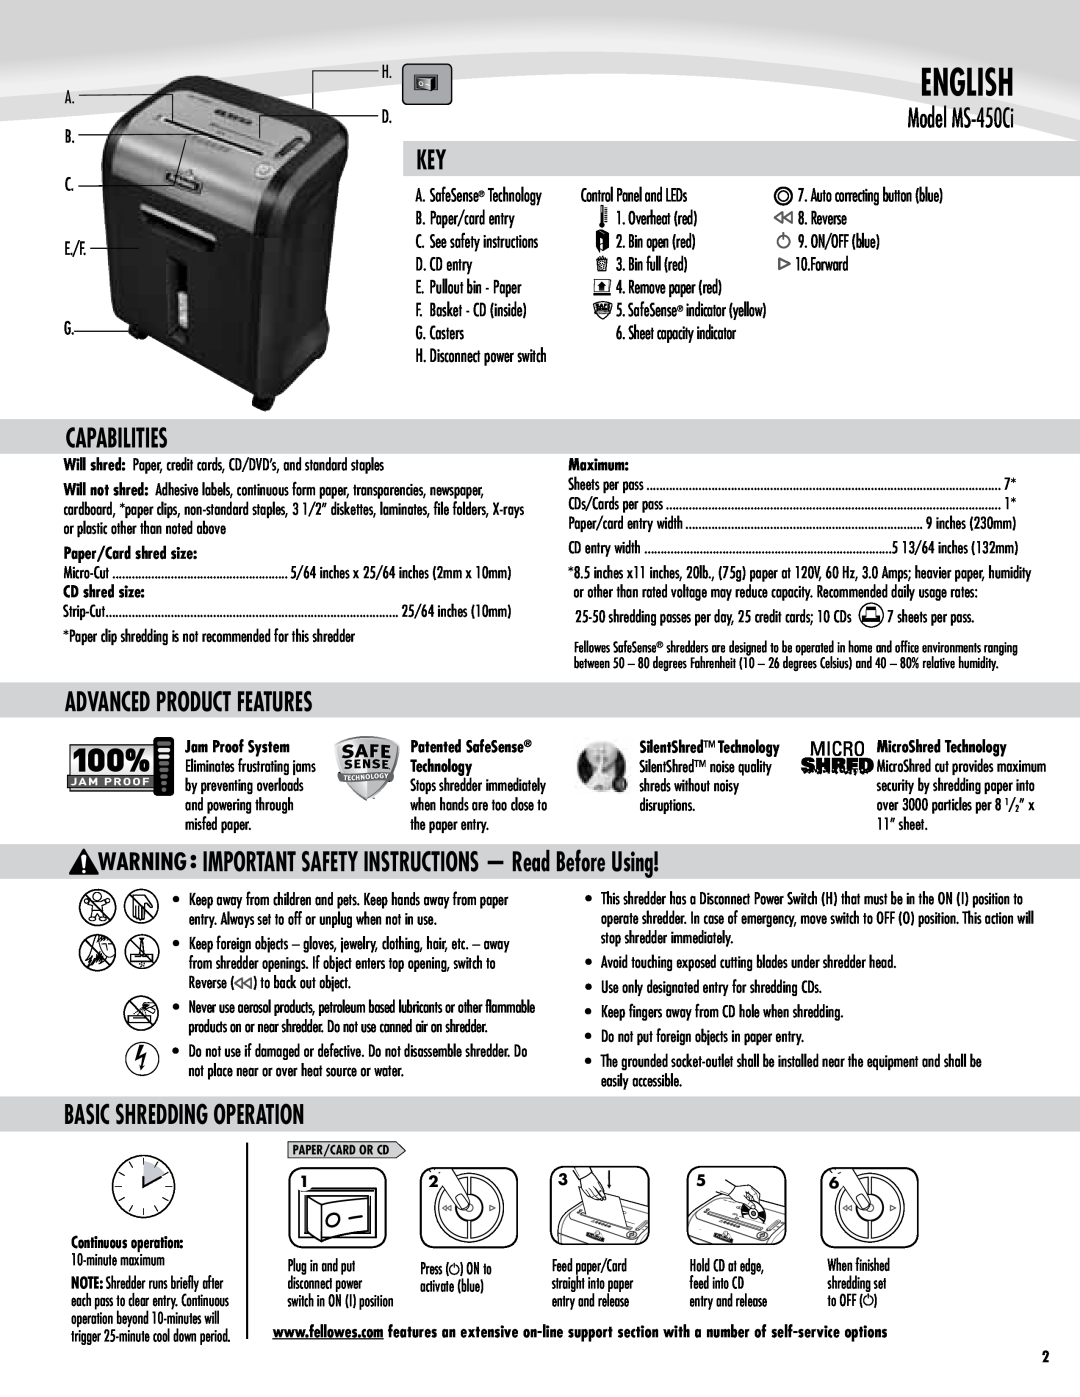 Fellowes MS-450Ci Capabilities, Advanced product features, IMPORTANT SAFETY INSTRUCTIONS - Read Before Using, English 